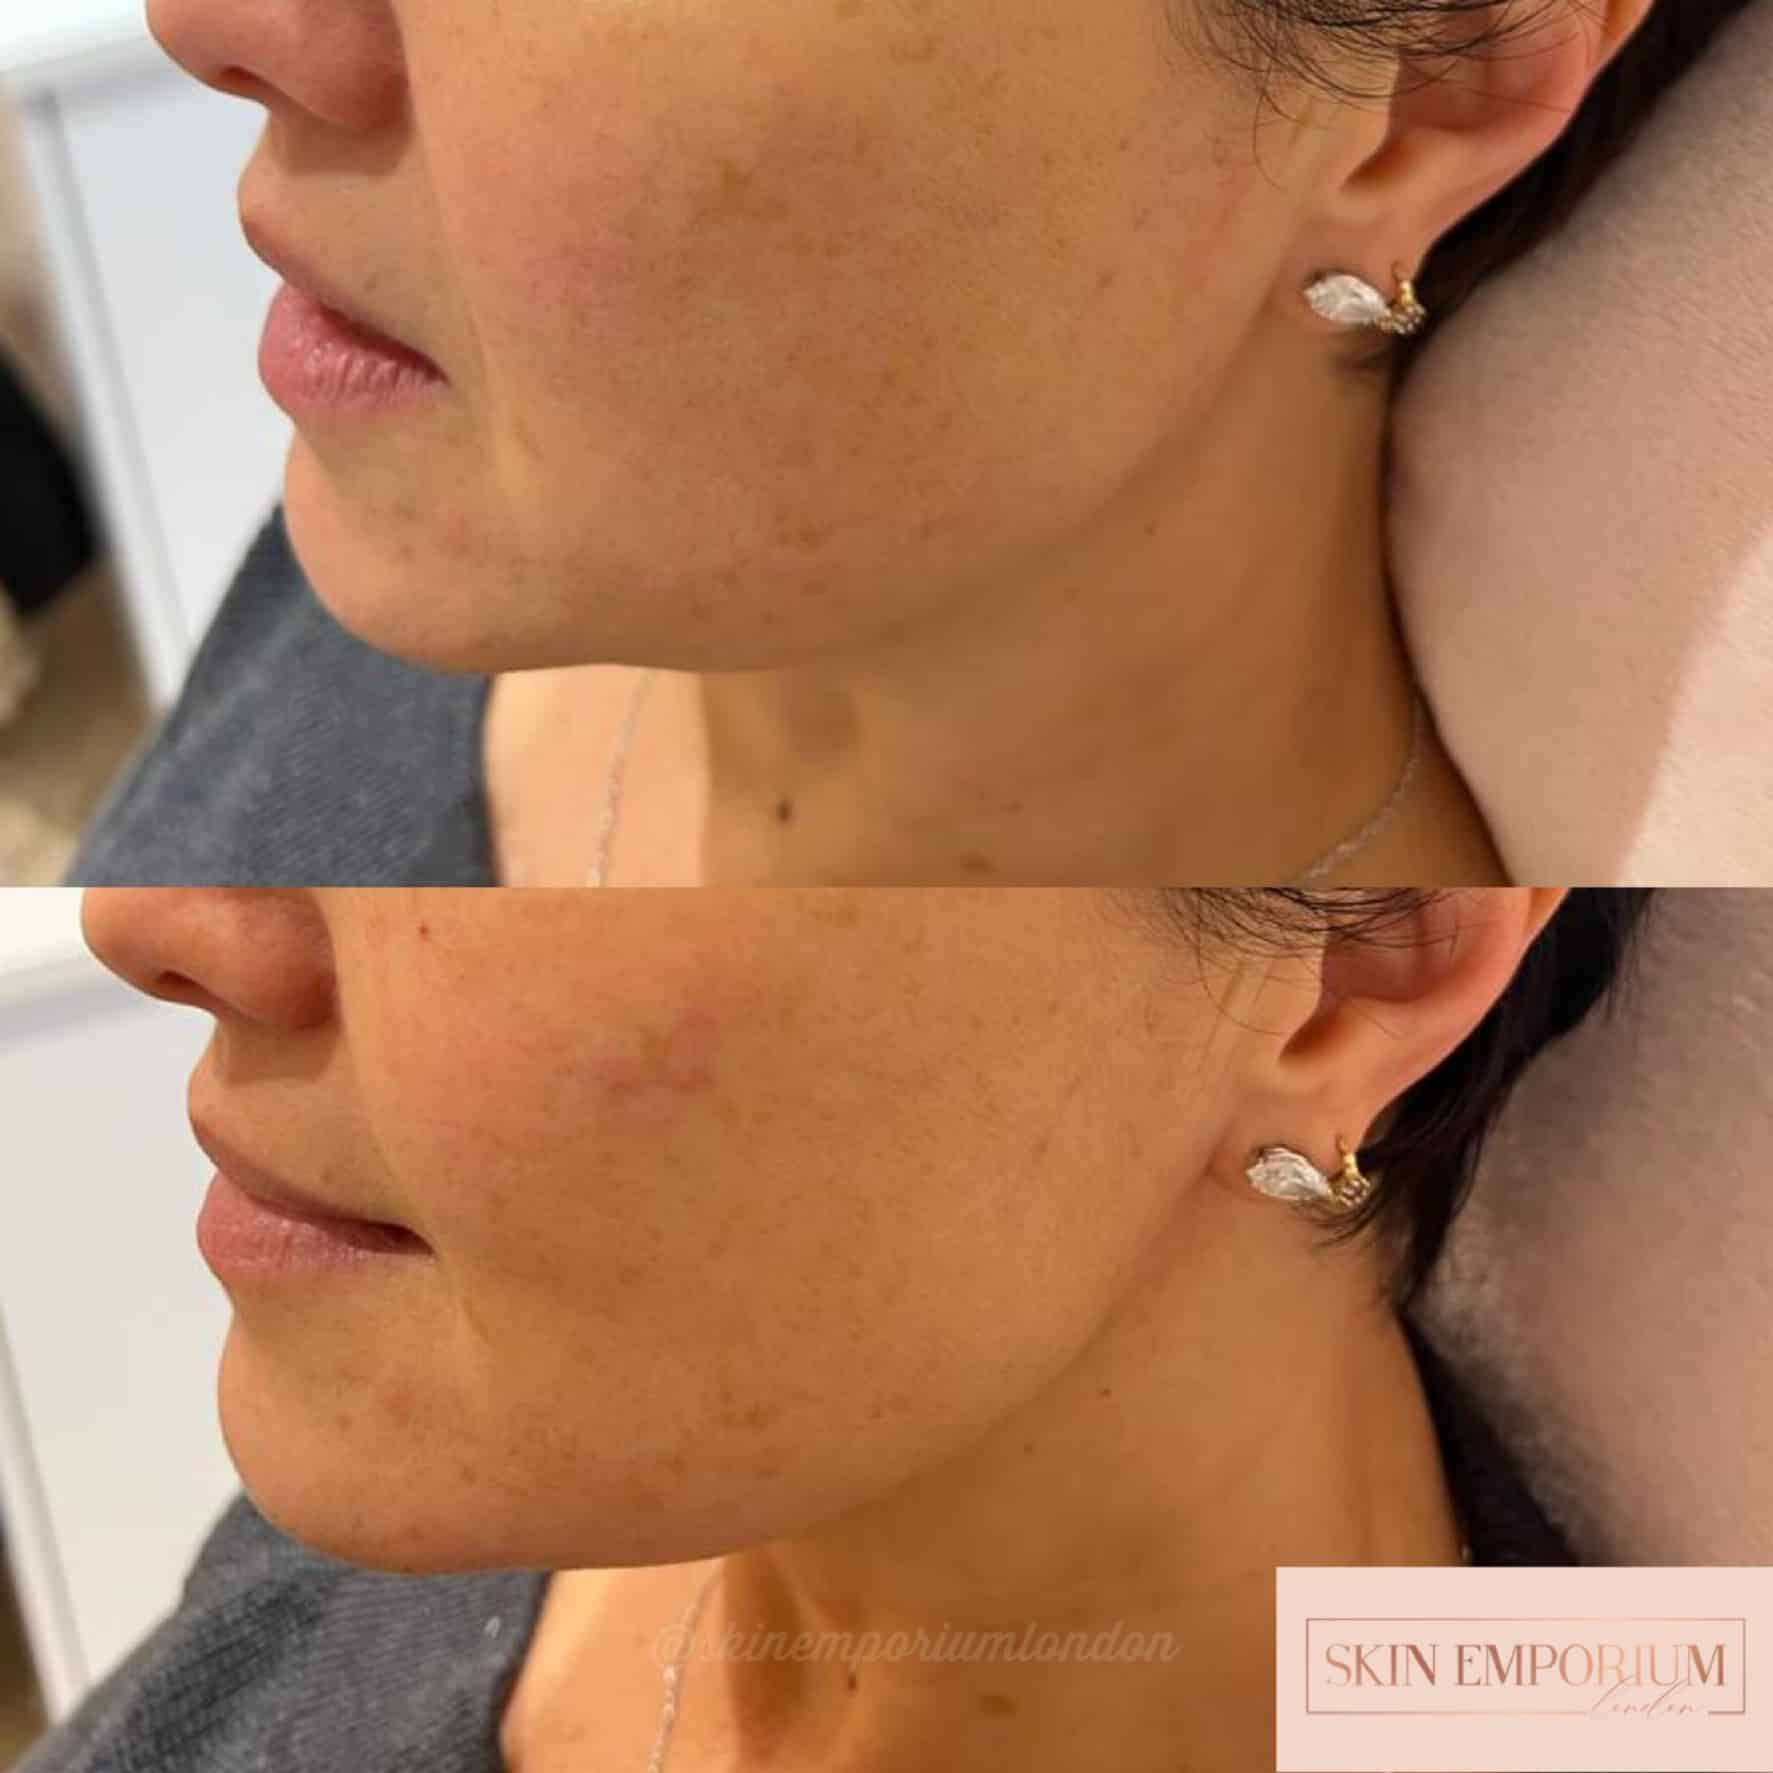 Before and after photo of a women having receivedcheek dermal fillers at the Skin Emporium in Clapham, London.